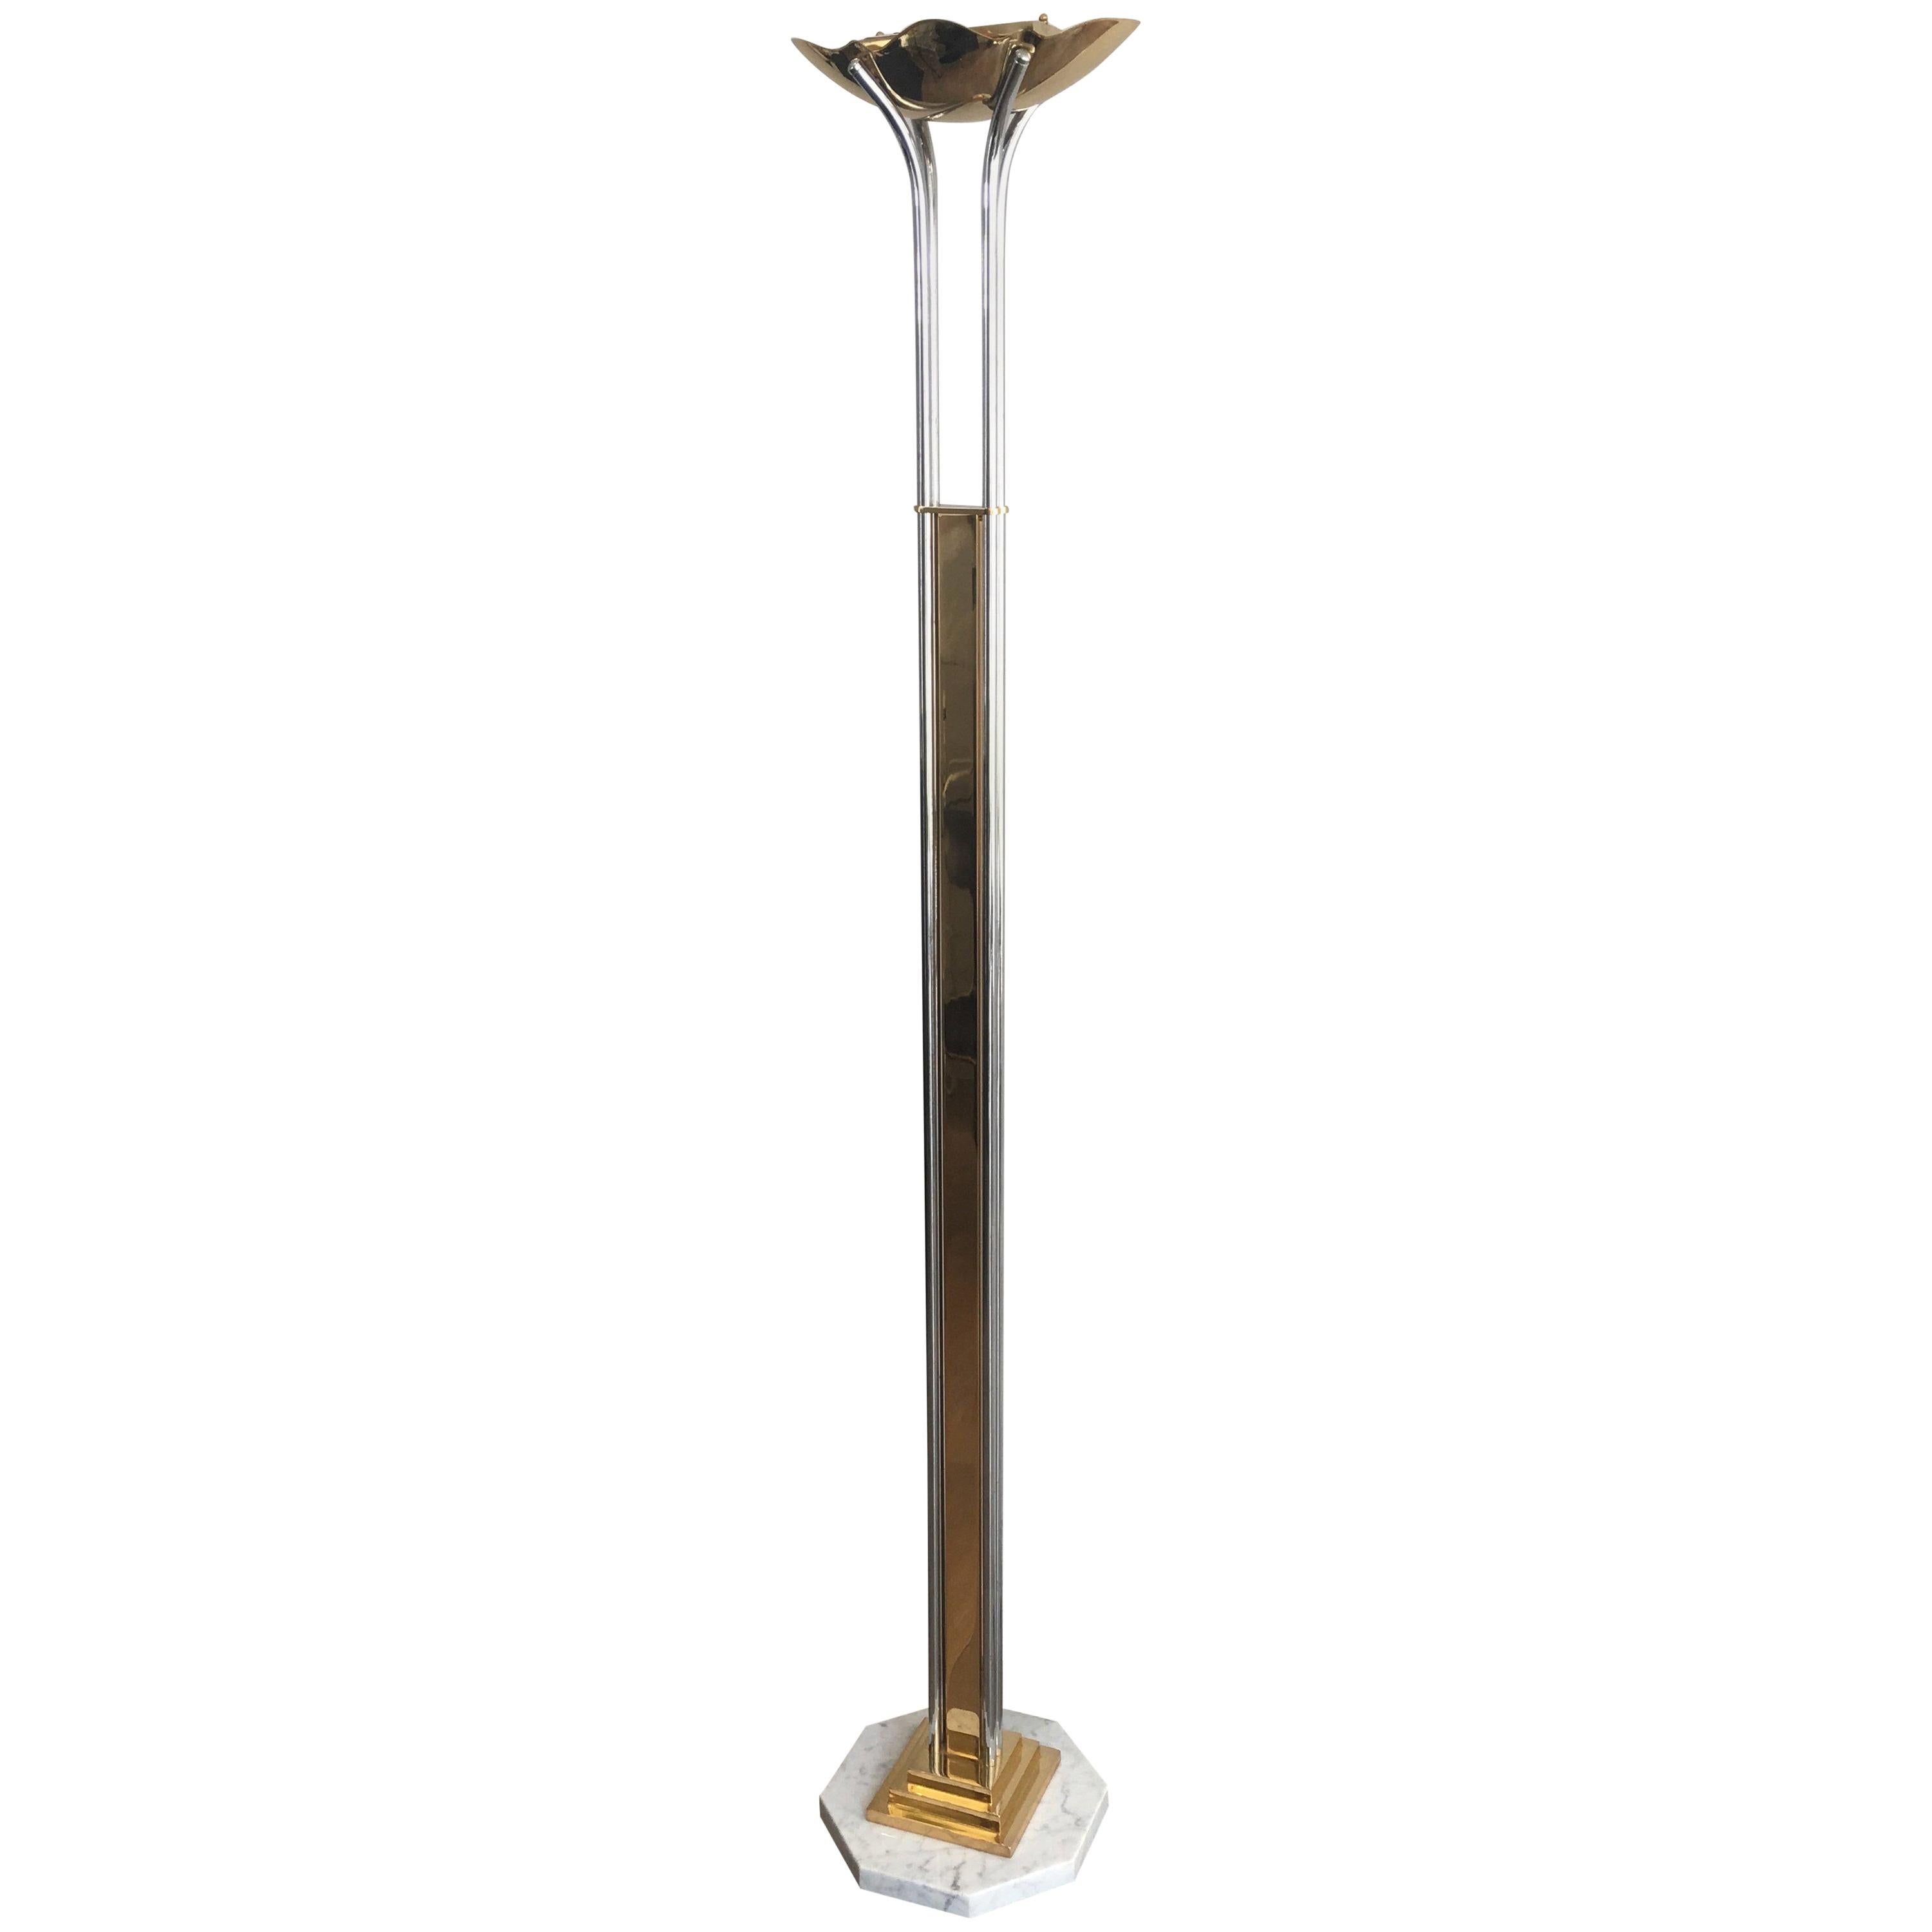 Unusual Brass, Chrome and Marble Floor Lamp, French, circa 1970